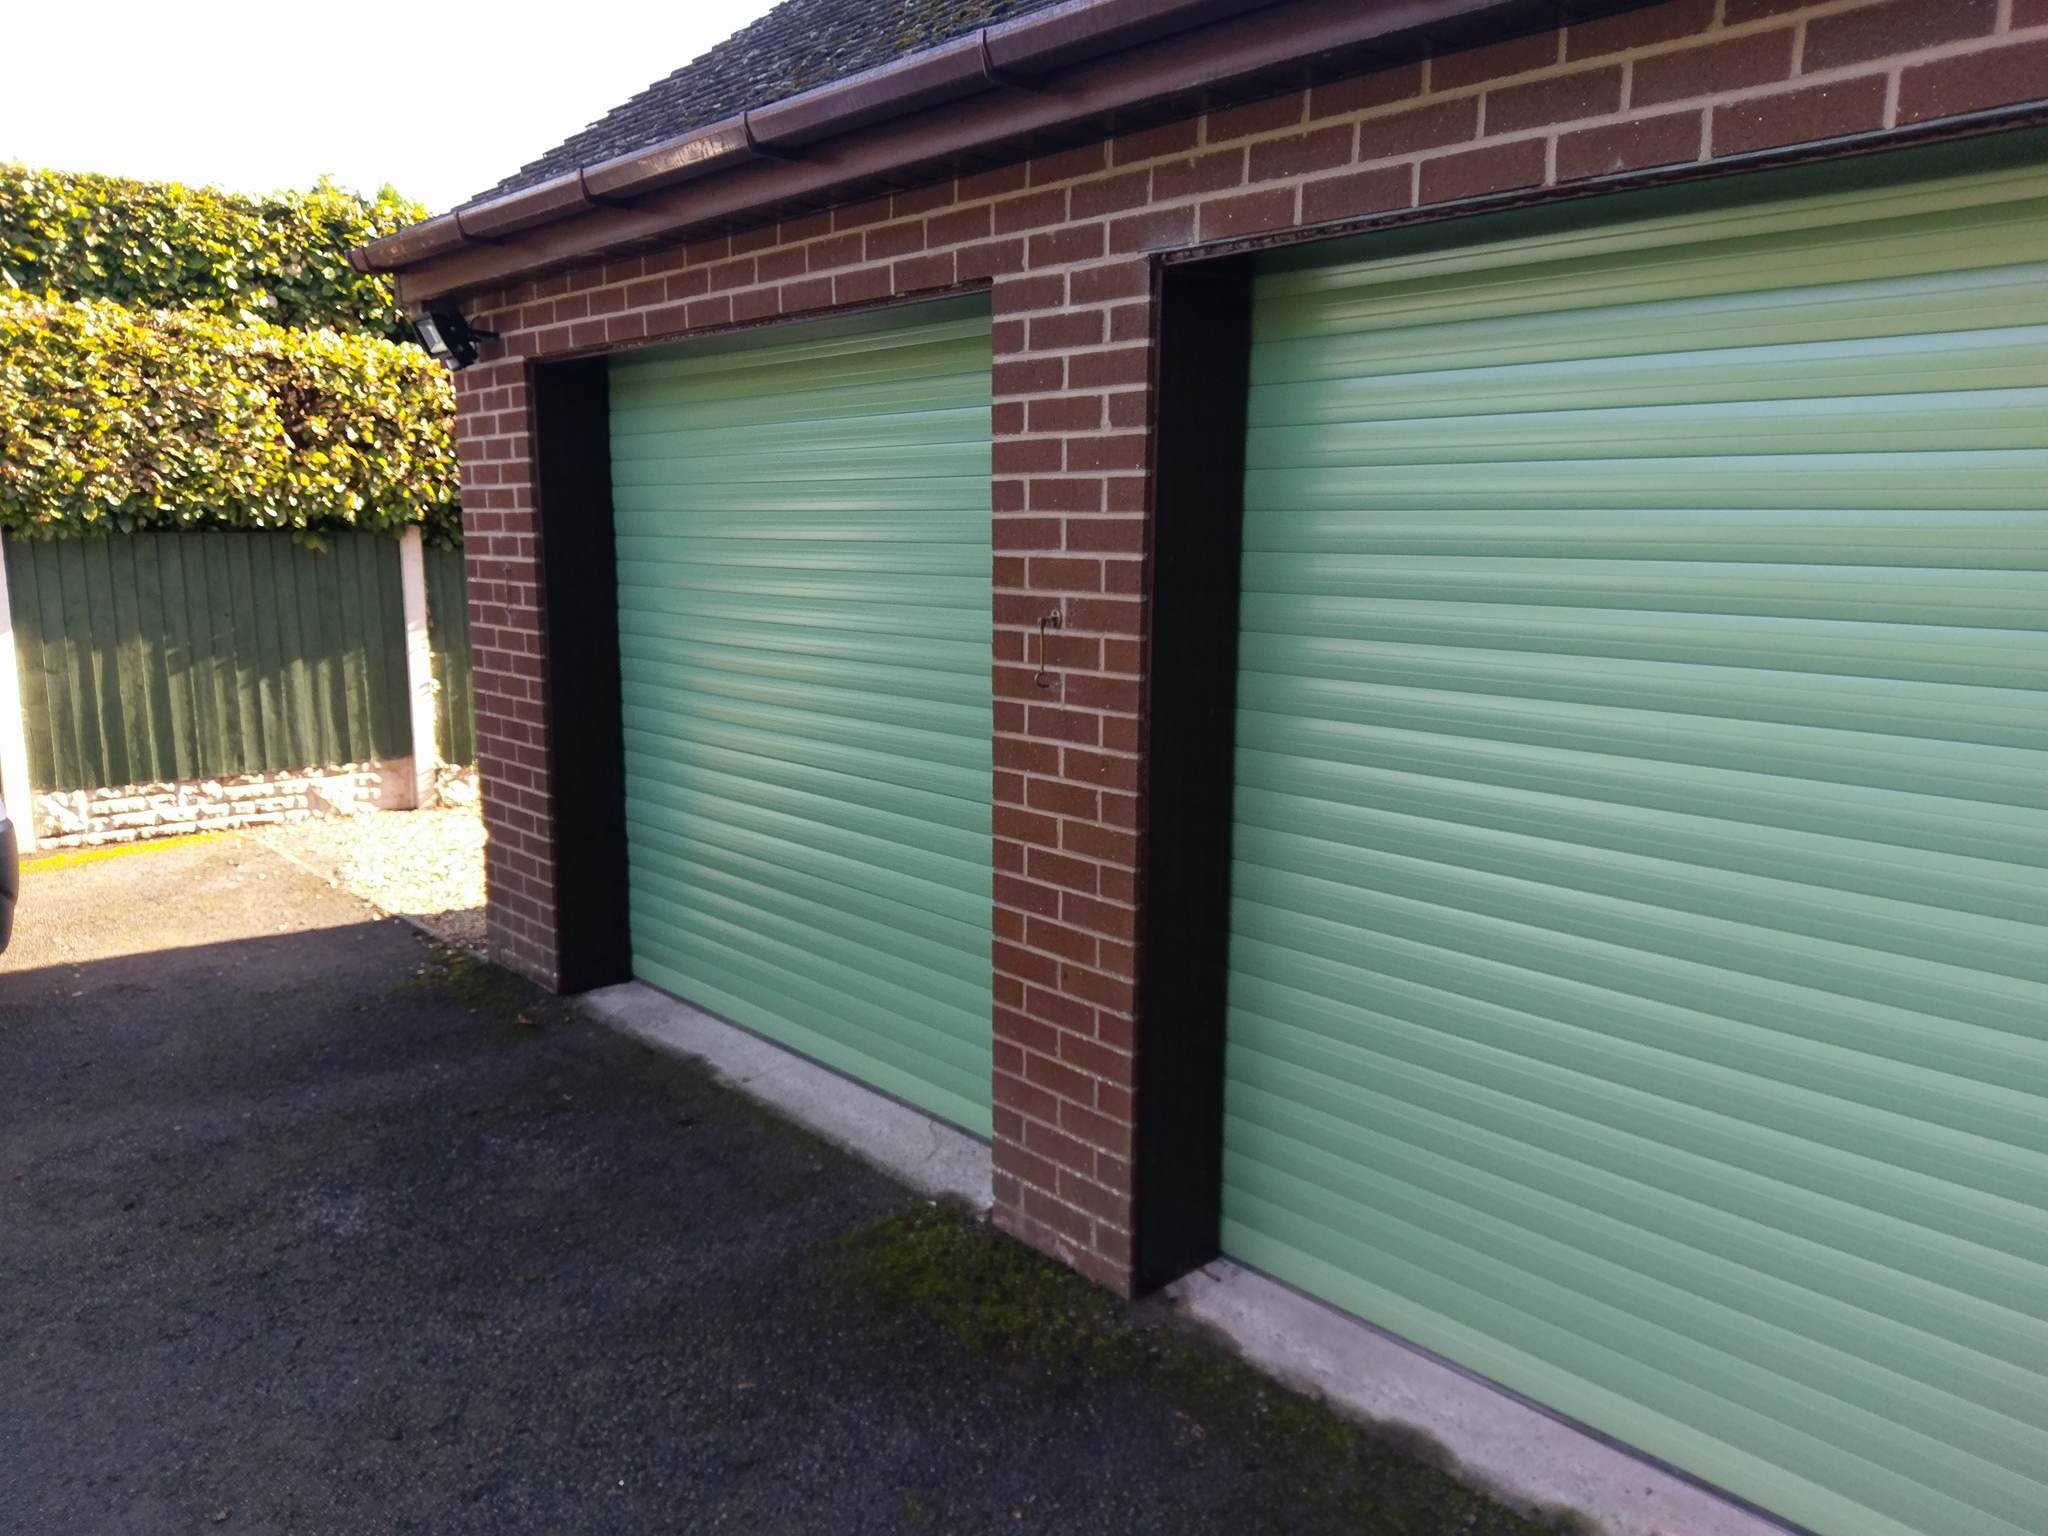 Aluroll Classic insulated roller doors in Sage Green